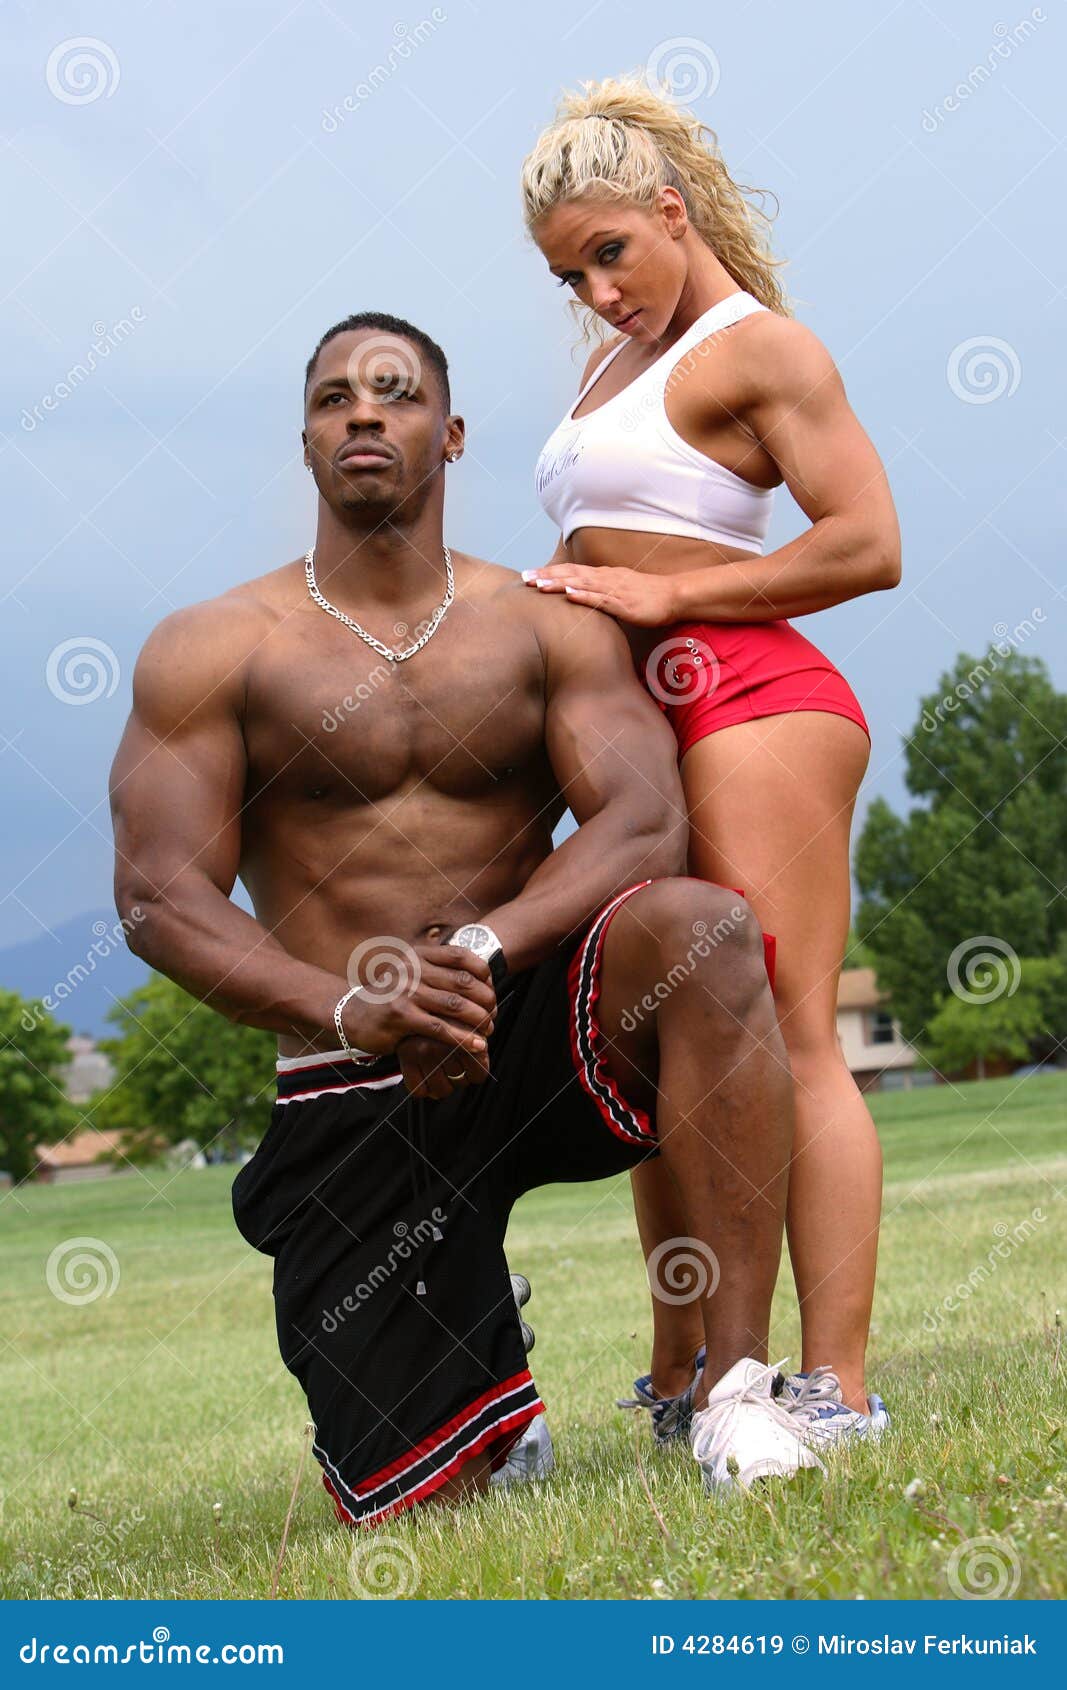 Black muscle guys hot girls 6 630 Male Female Bodybuilder Photos Free Royalty Free Stock Photos From Dreamstime